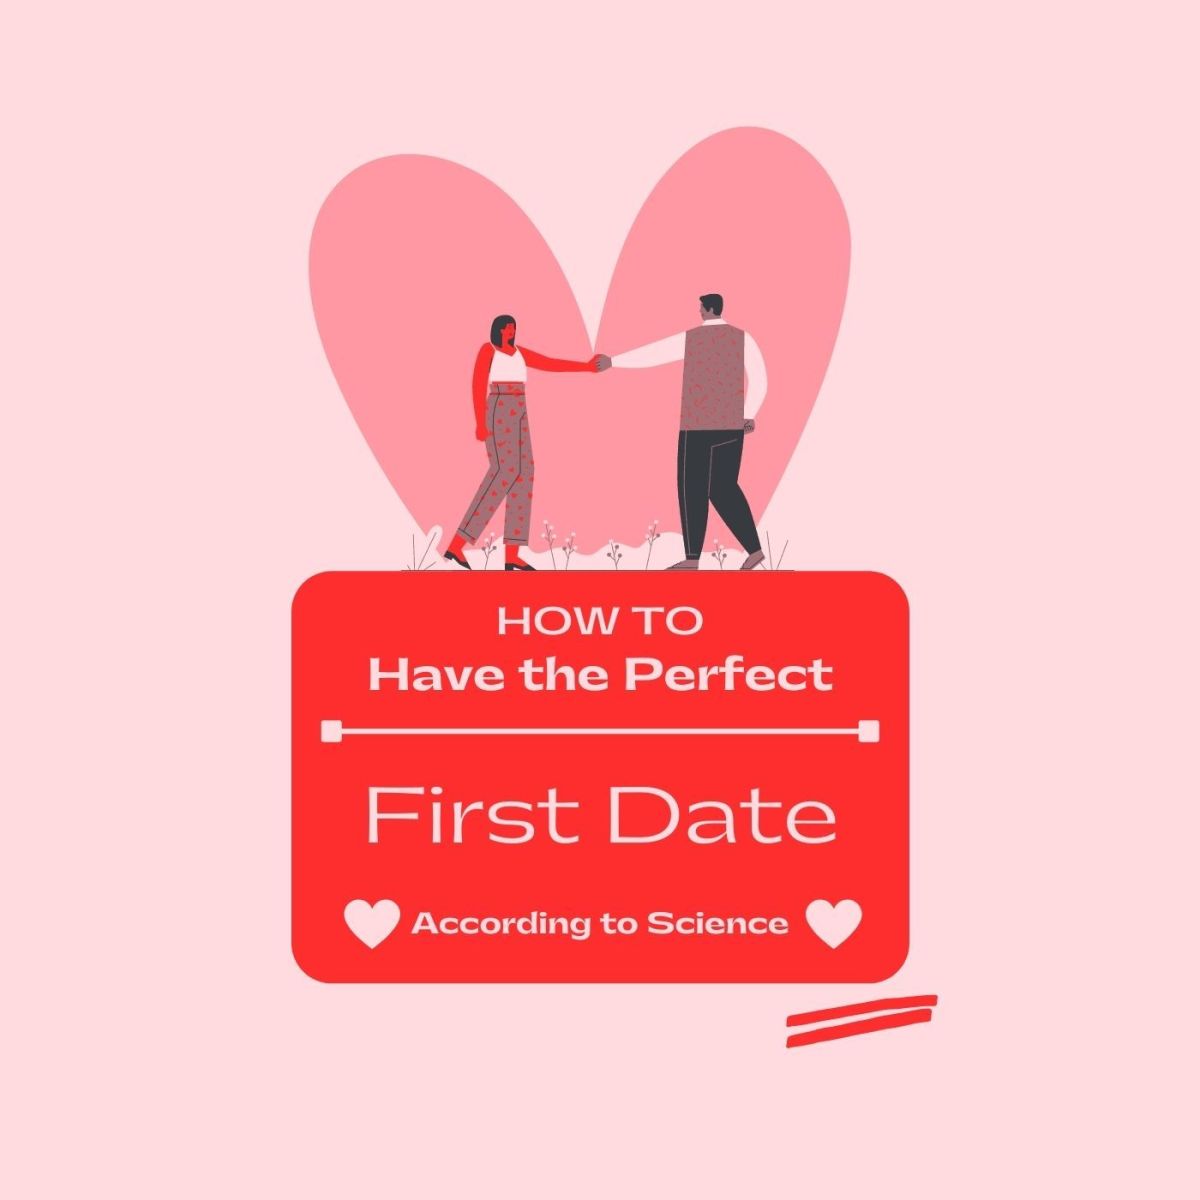 Five Tips on How to Have the Perfect First Date (According to Science)